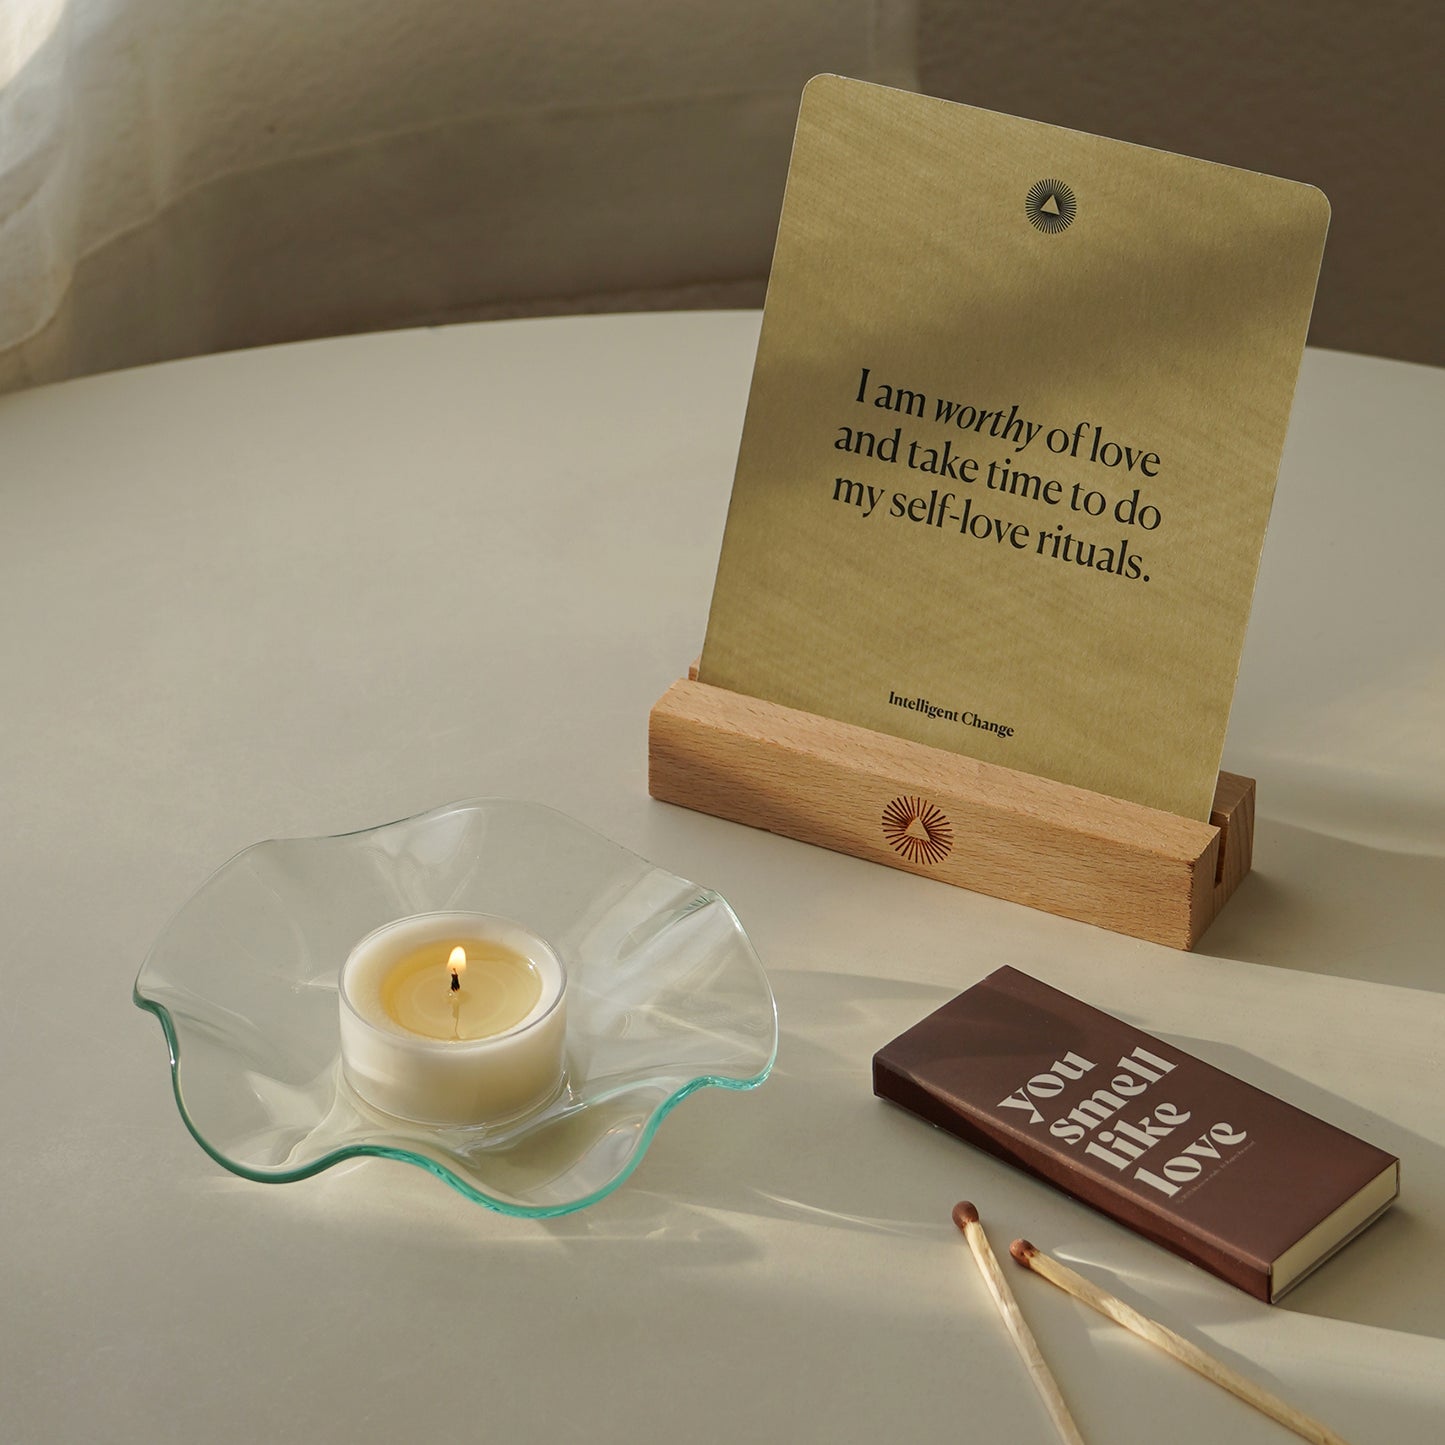 a lit tealight candle placed on a clear ruffle dish, brown matches, a brown matchbox inscribed with "you smell like love" and an affirmation card on the white round table